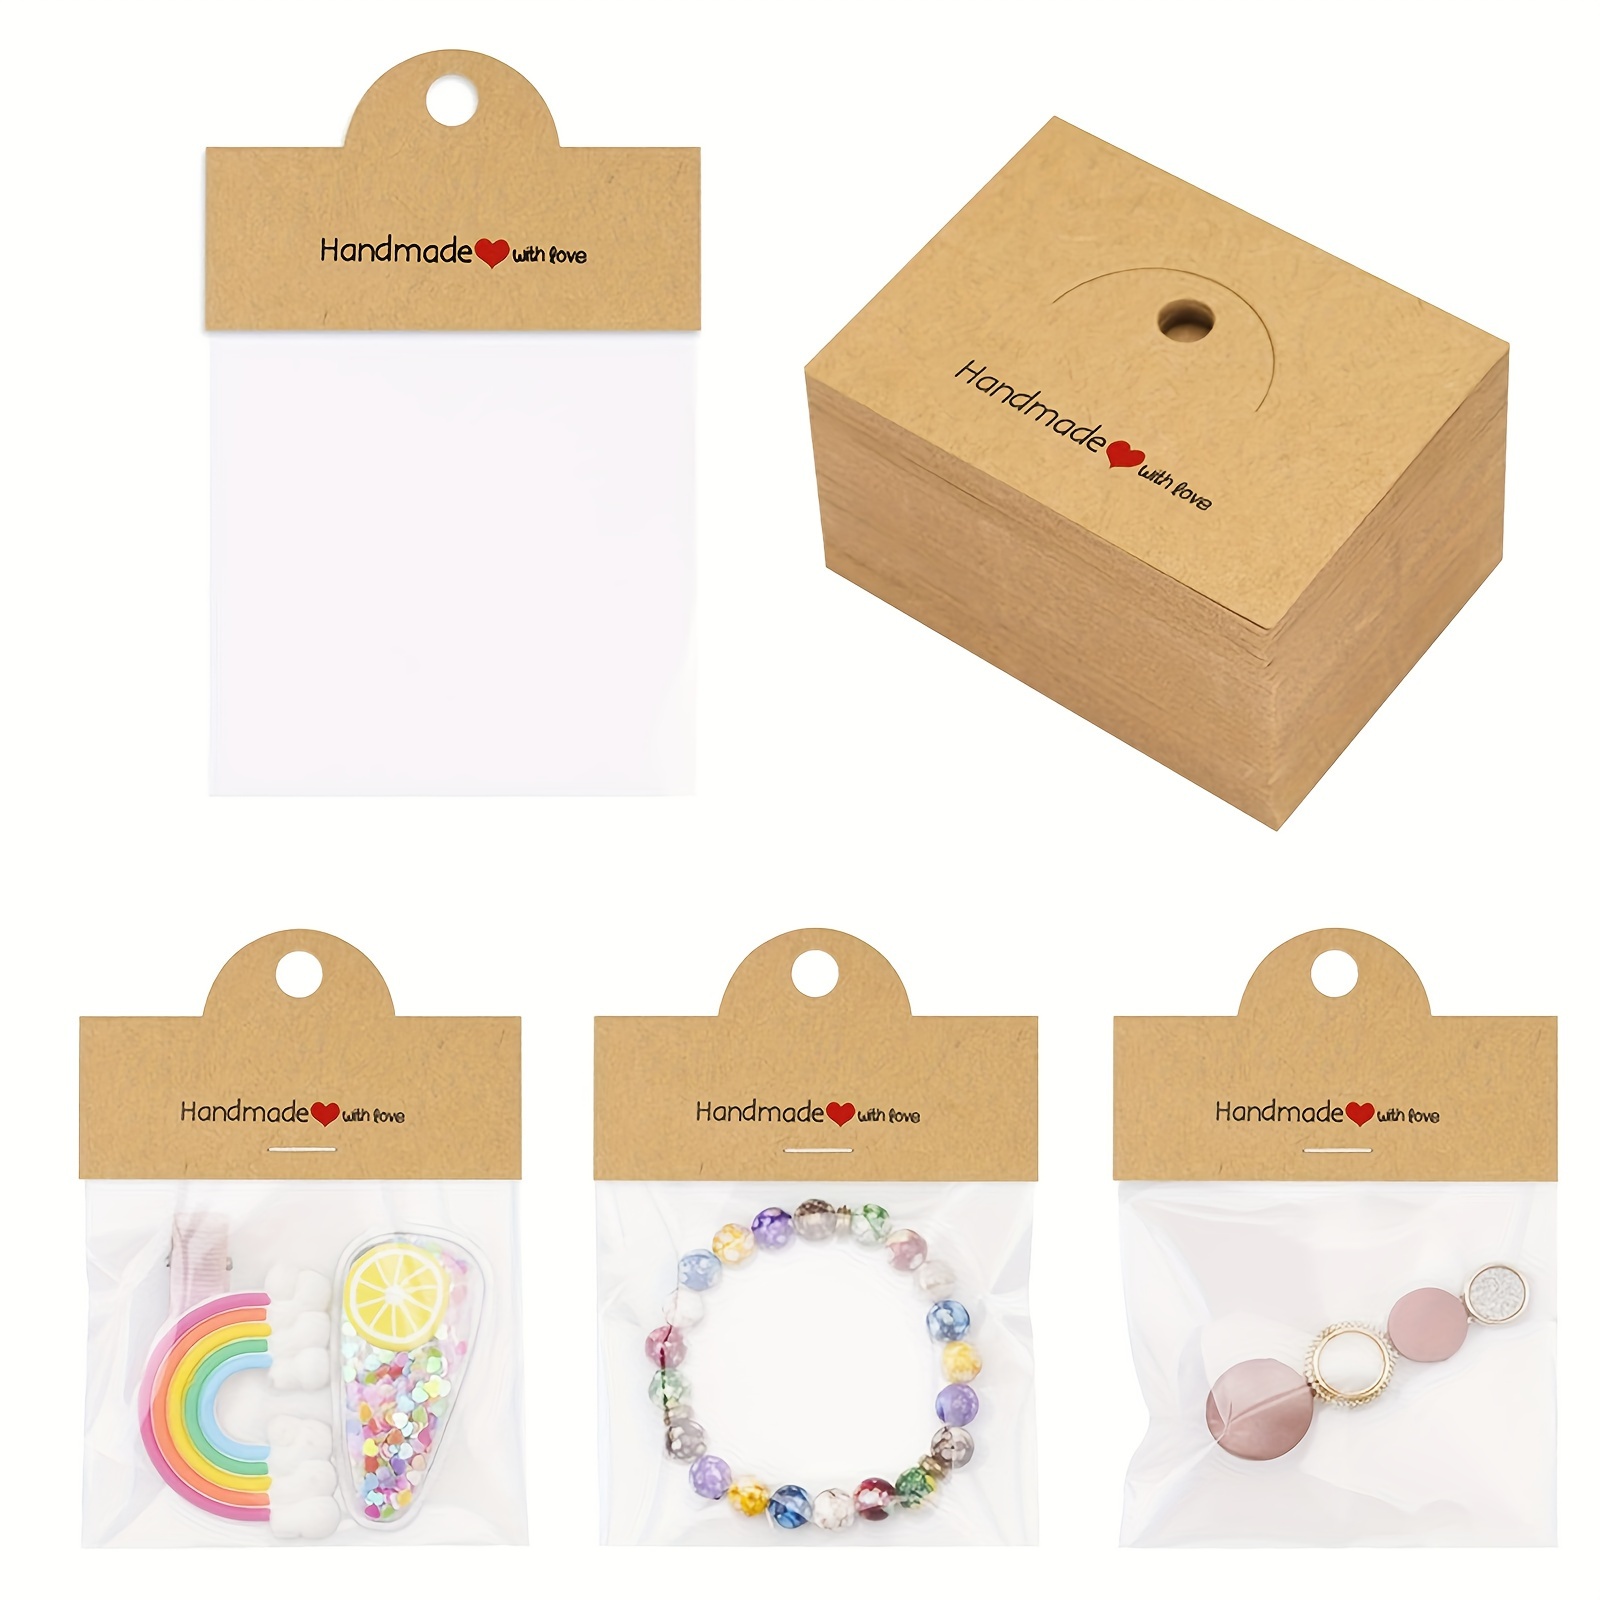 

100pcs Jewelry Packaging Products, Including 50 Bags And 50 Cards, Jewelry Display Transparent Bags, Small Craft Packaging Sets For Bracelets, Keychains, Earrings, Headwear, Jewelry